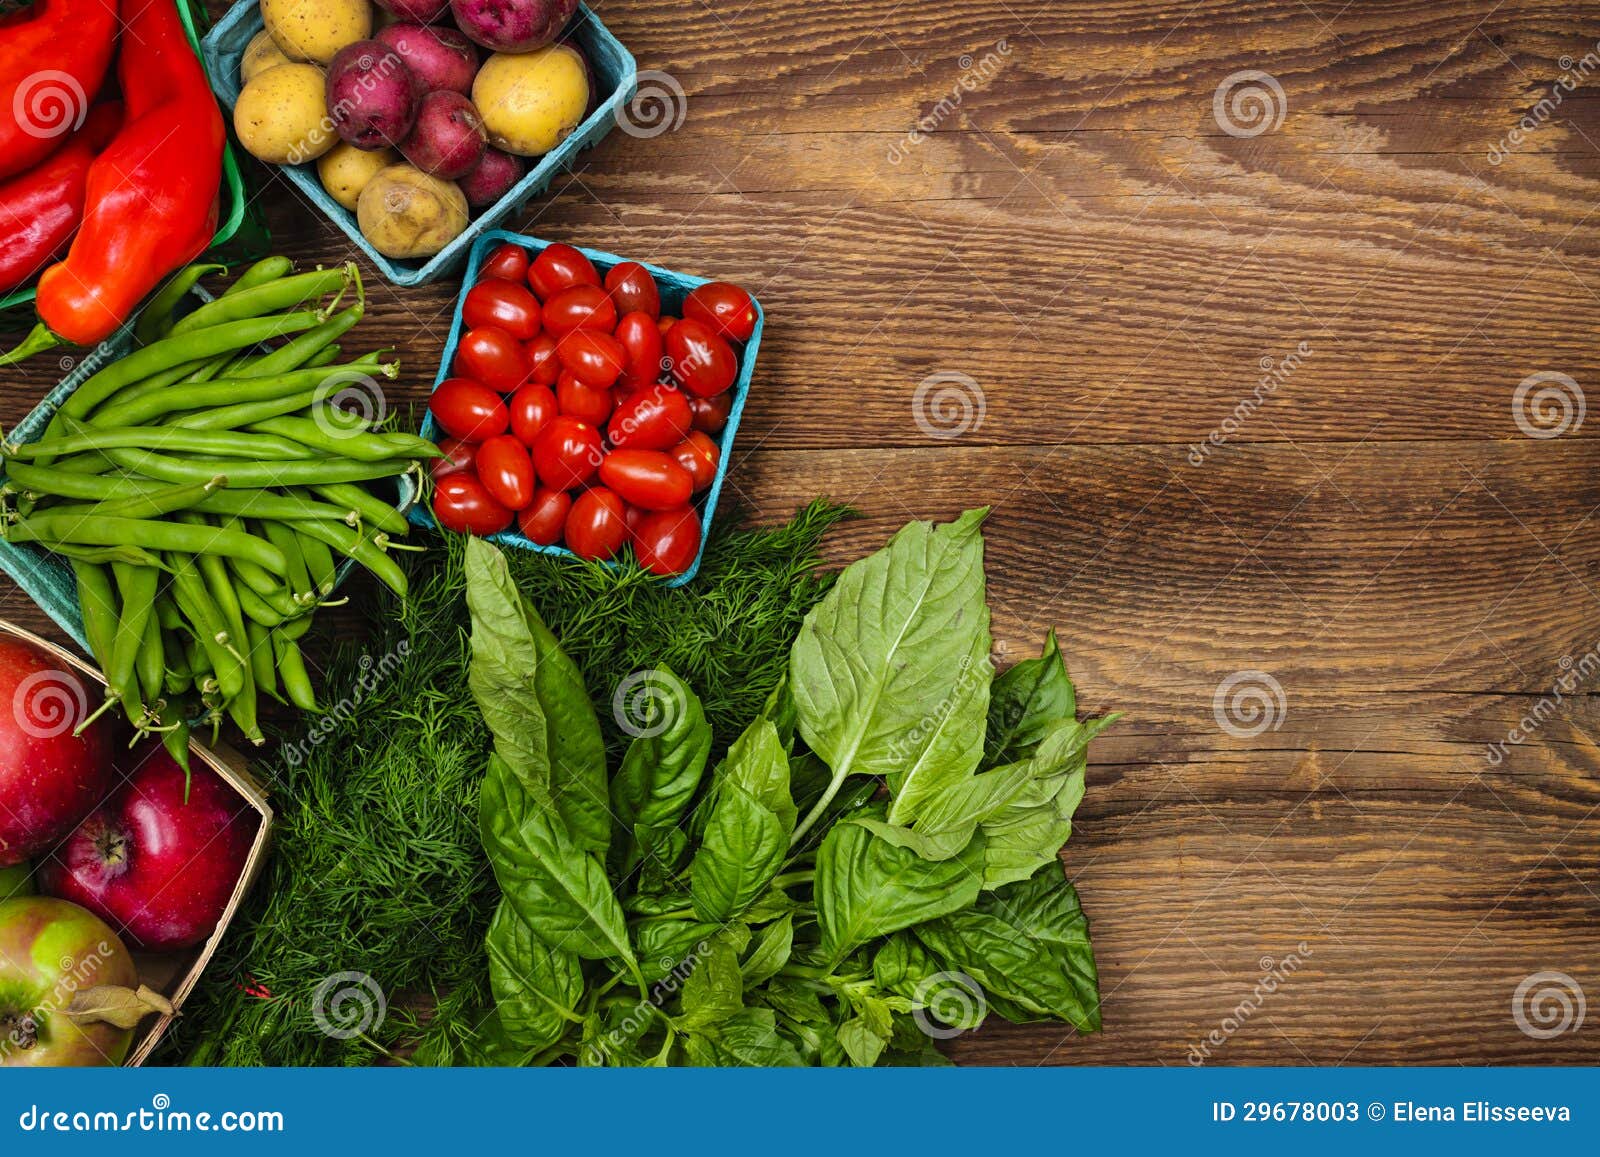 Fresh Market Fruits And Vegetables Stock Photos Image